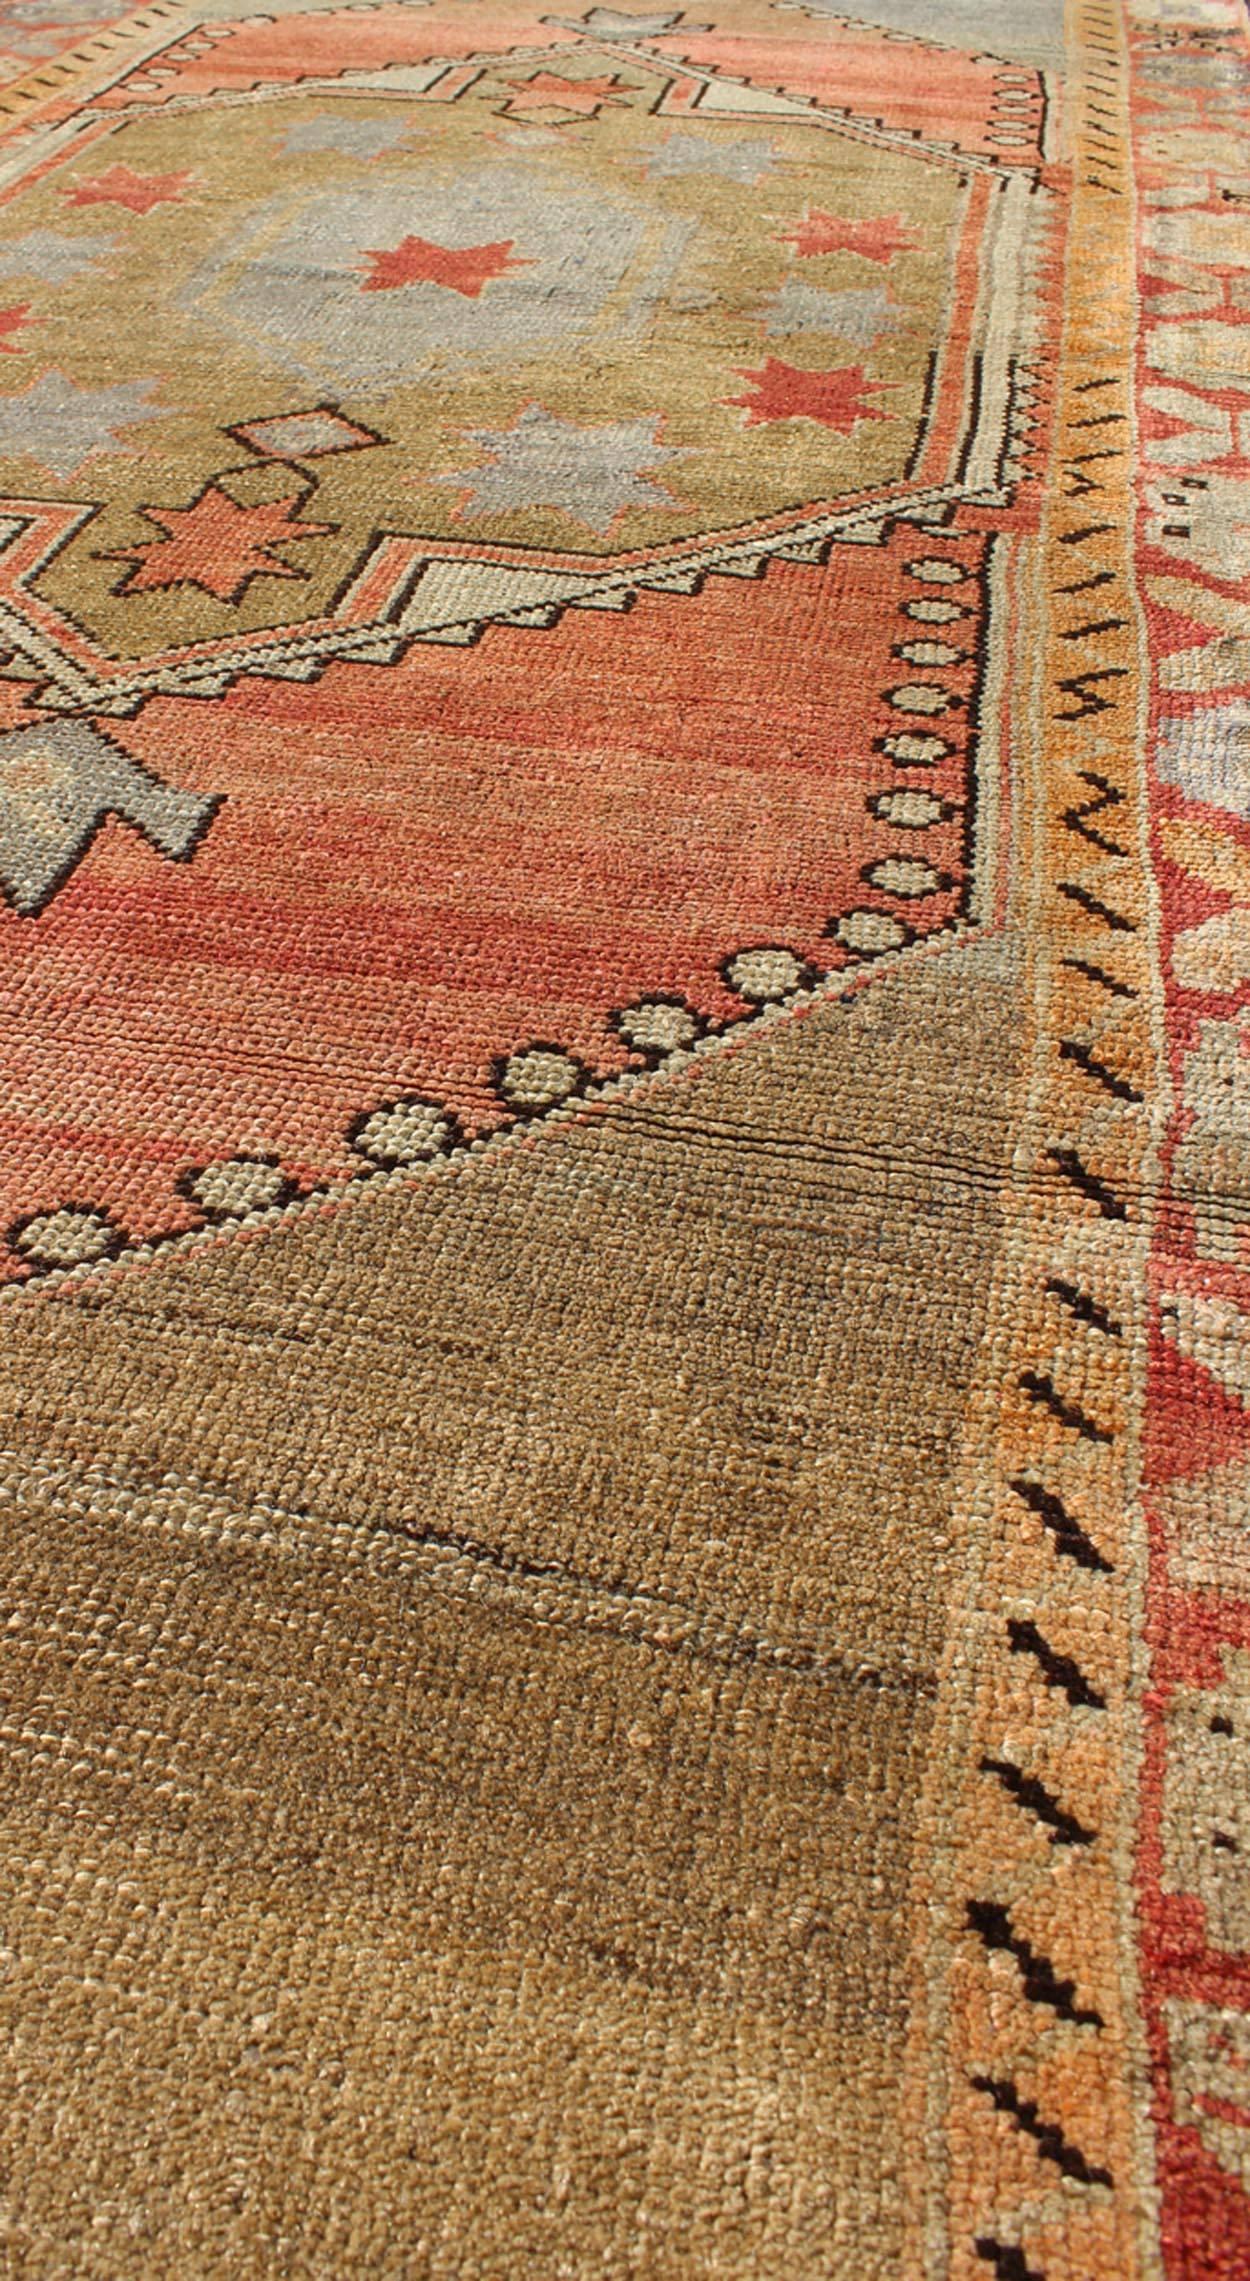 Mid-20th Century Vintage Turkish Oushak Rug in Faded Red, Camel, Light Blue